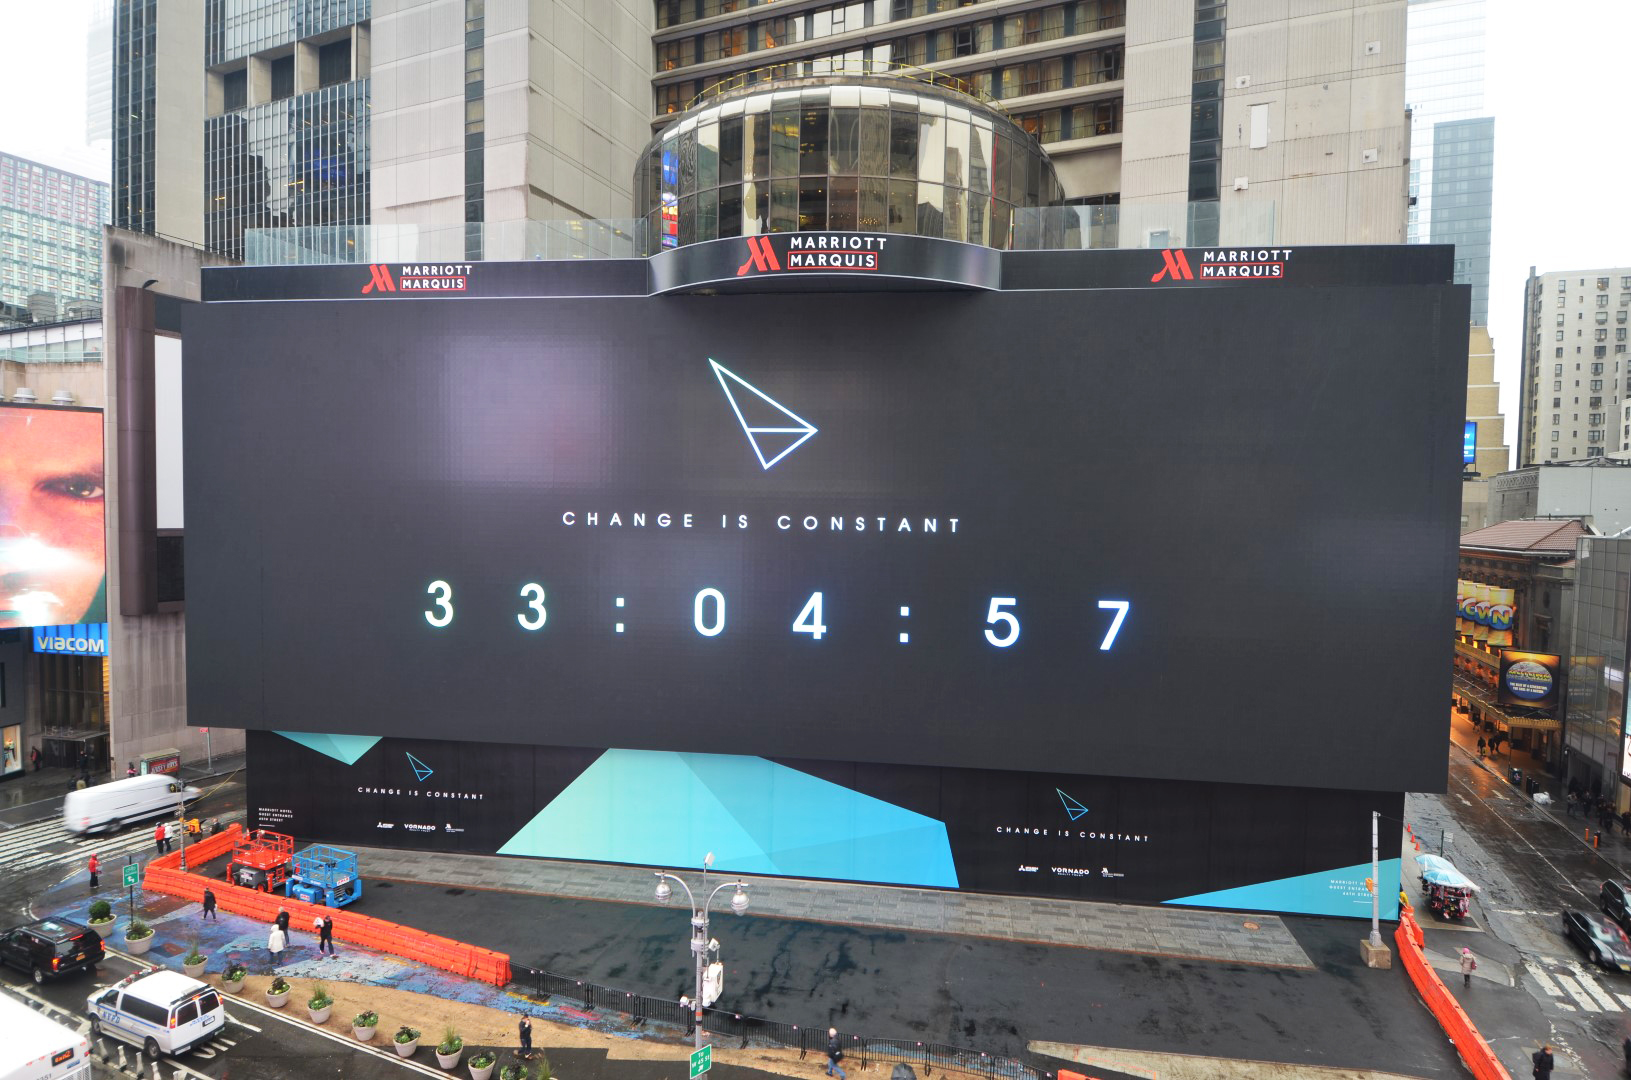 PHOTO: The biggest billboard in Times Square spans 77.69 feet by 329.65 feet.